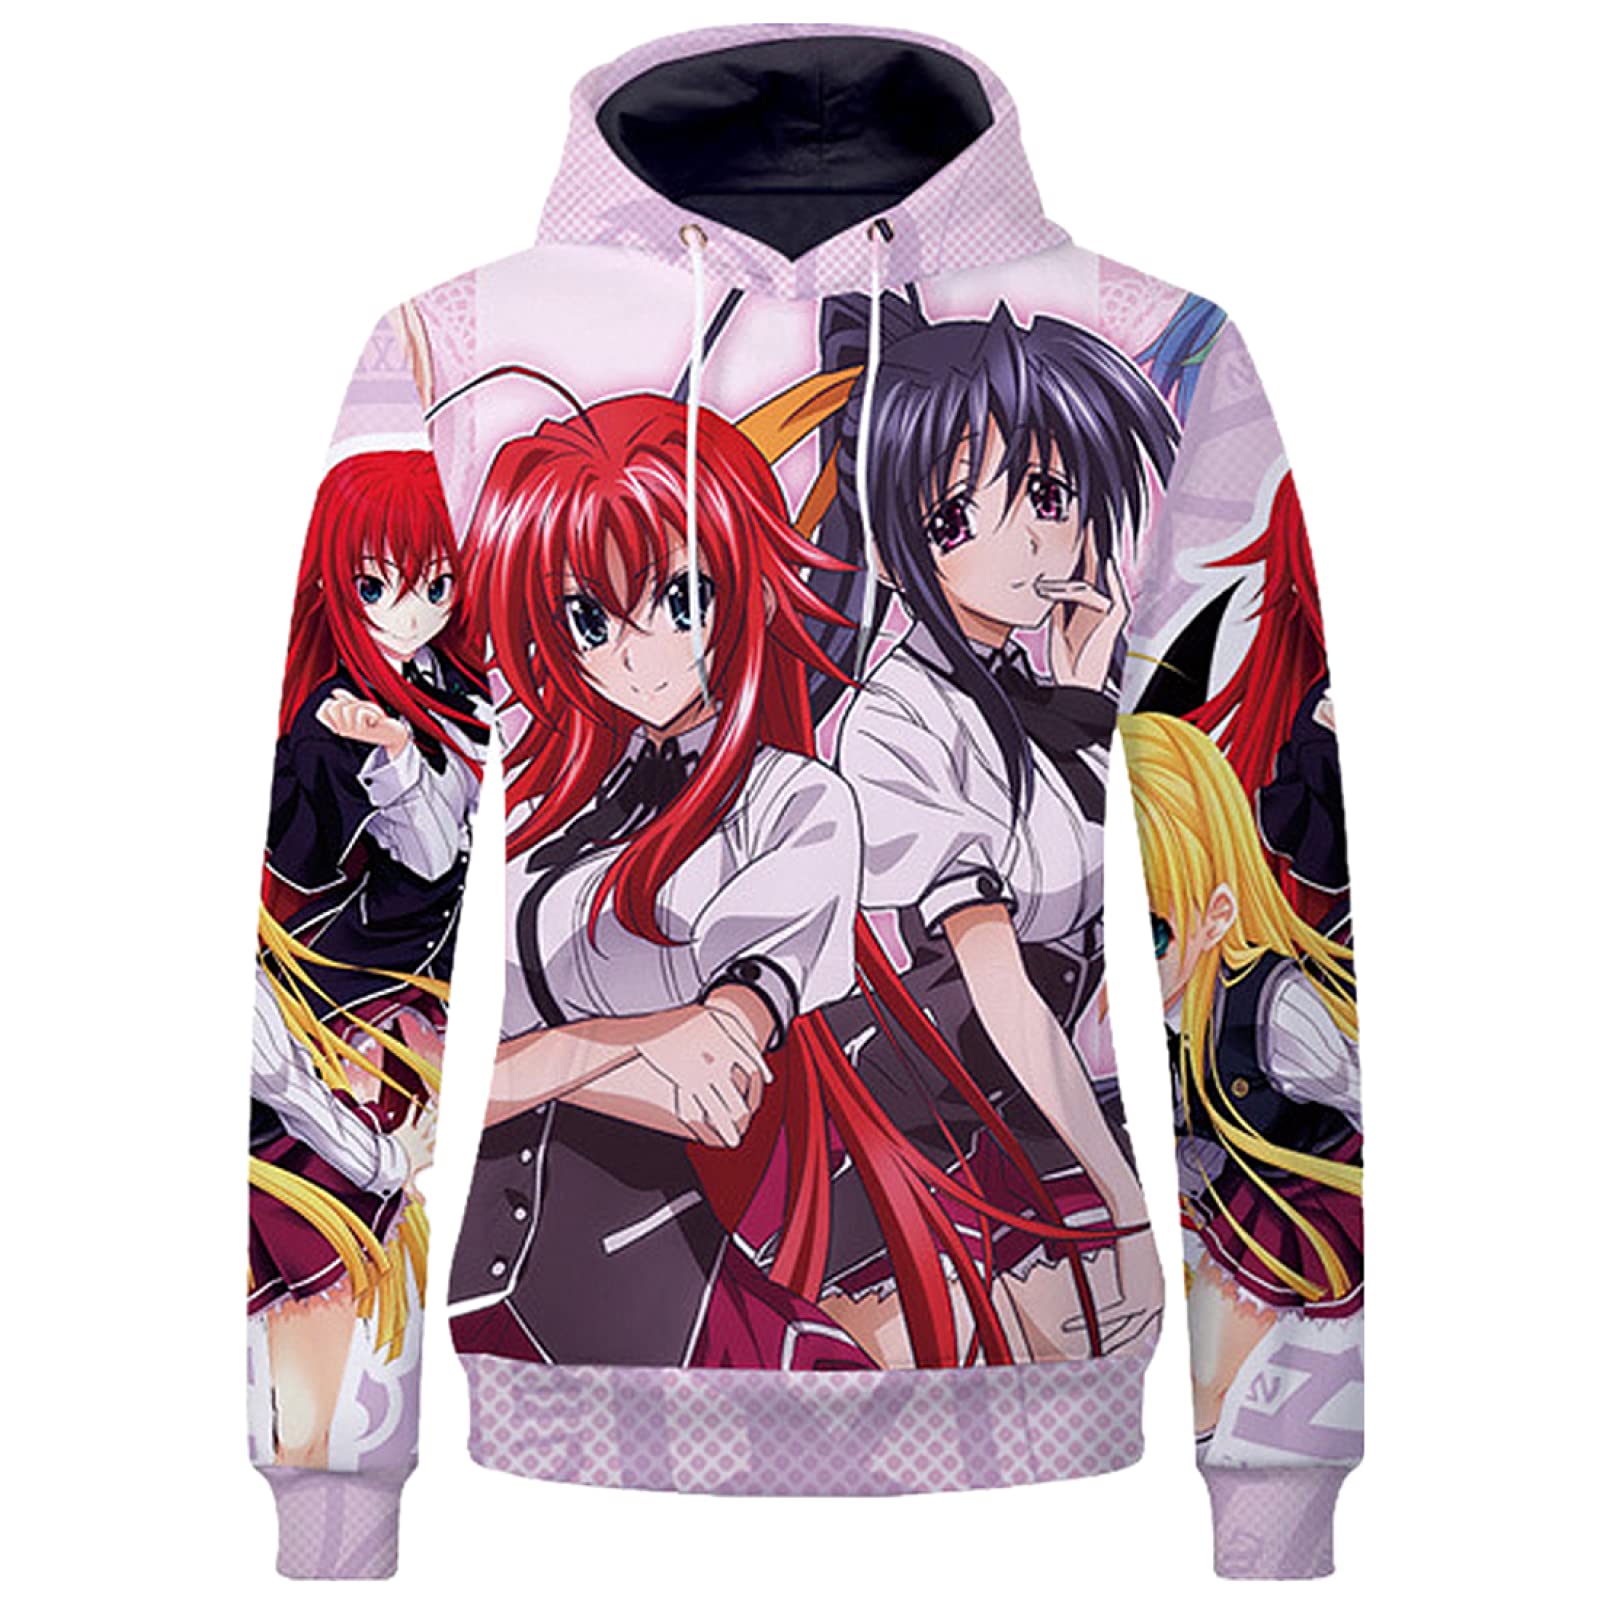 Anime High School DxD Cosplay Hoodie Pullover, Unisex 3D-Druck Casual Sweatshirts f?r Anime-Fans, Rose, 5X-Large